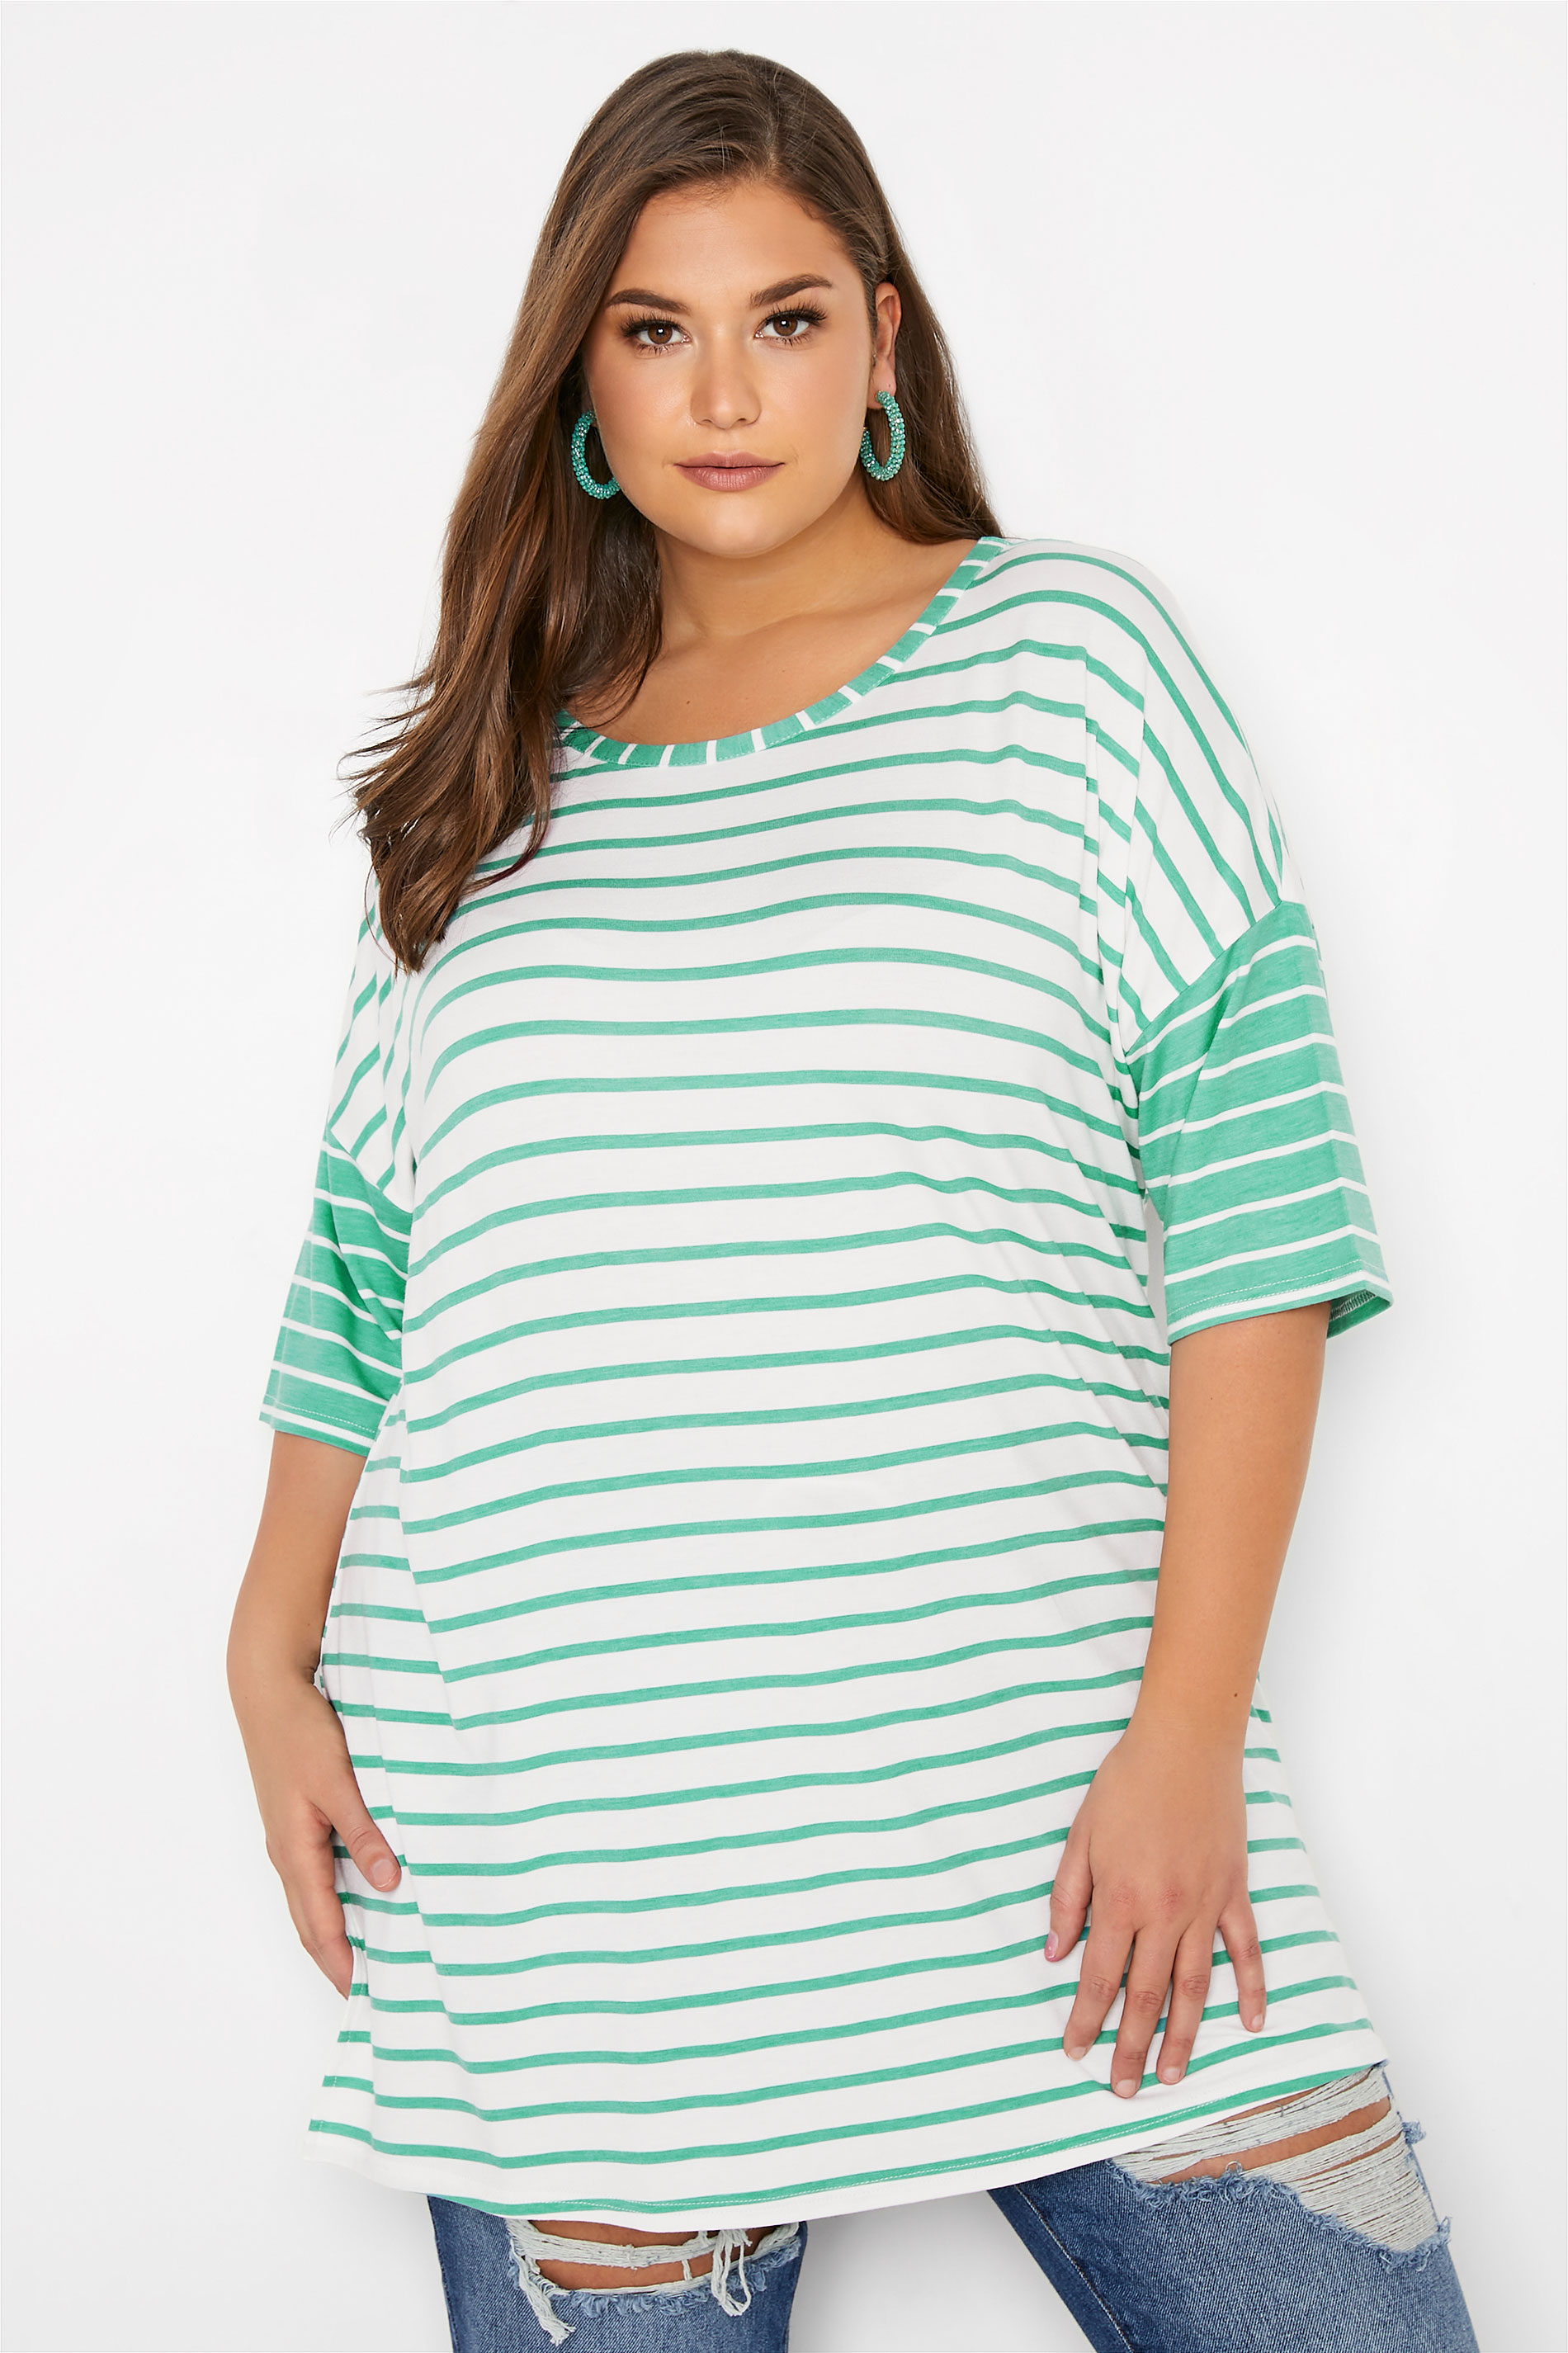 Grande taille  Tops Grande taille  Tops Casual | LIMITED COLLECTION - T-Shirt Oversize Vert & Blanc à Rayures - EG41680